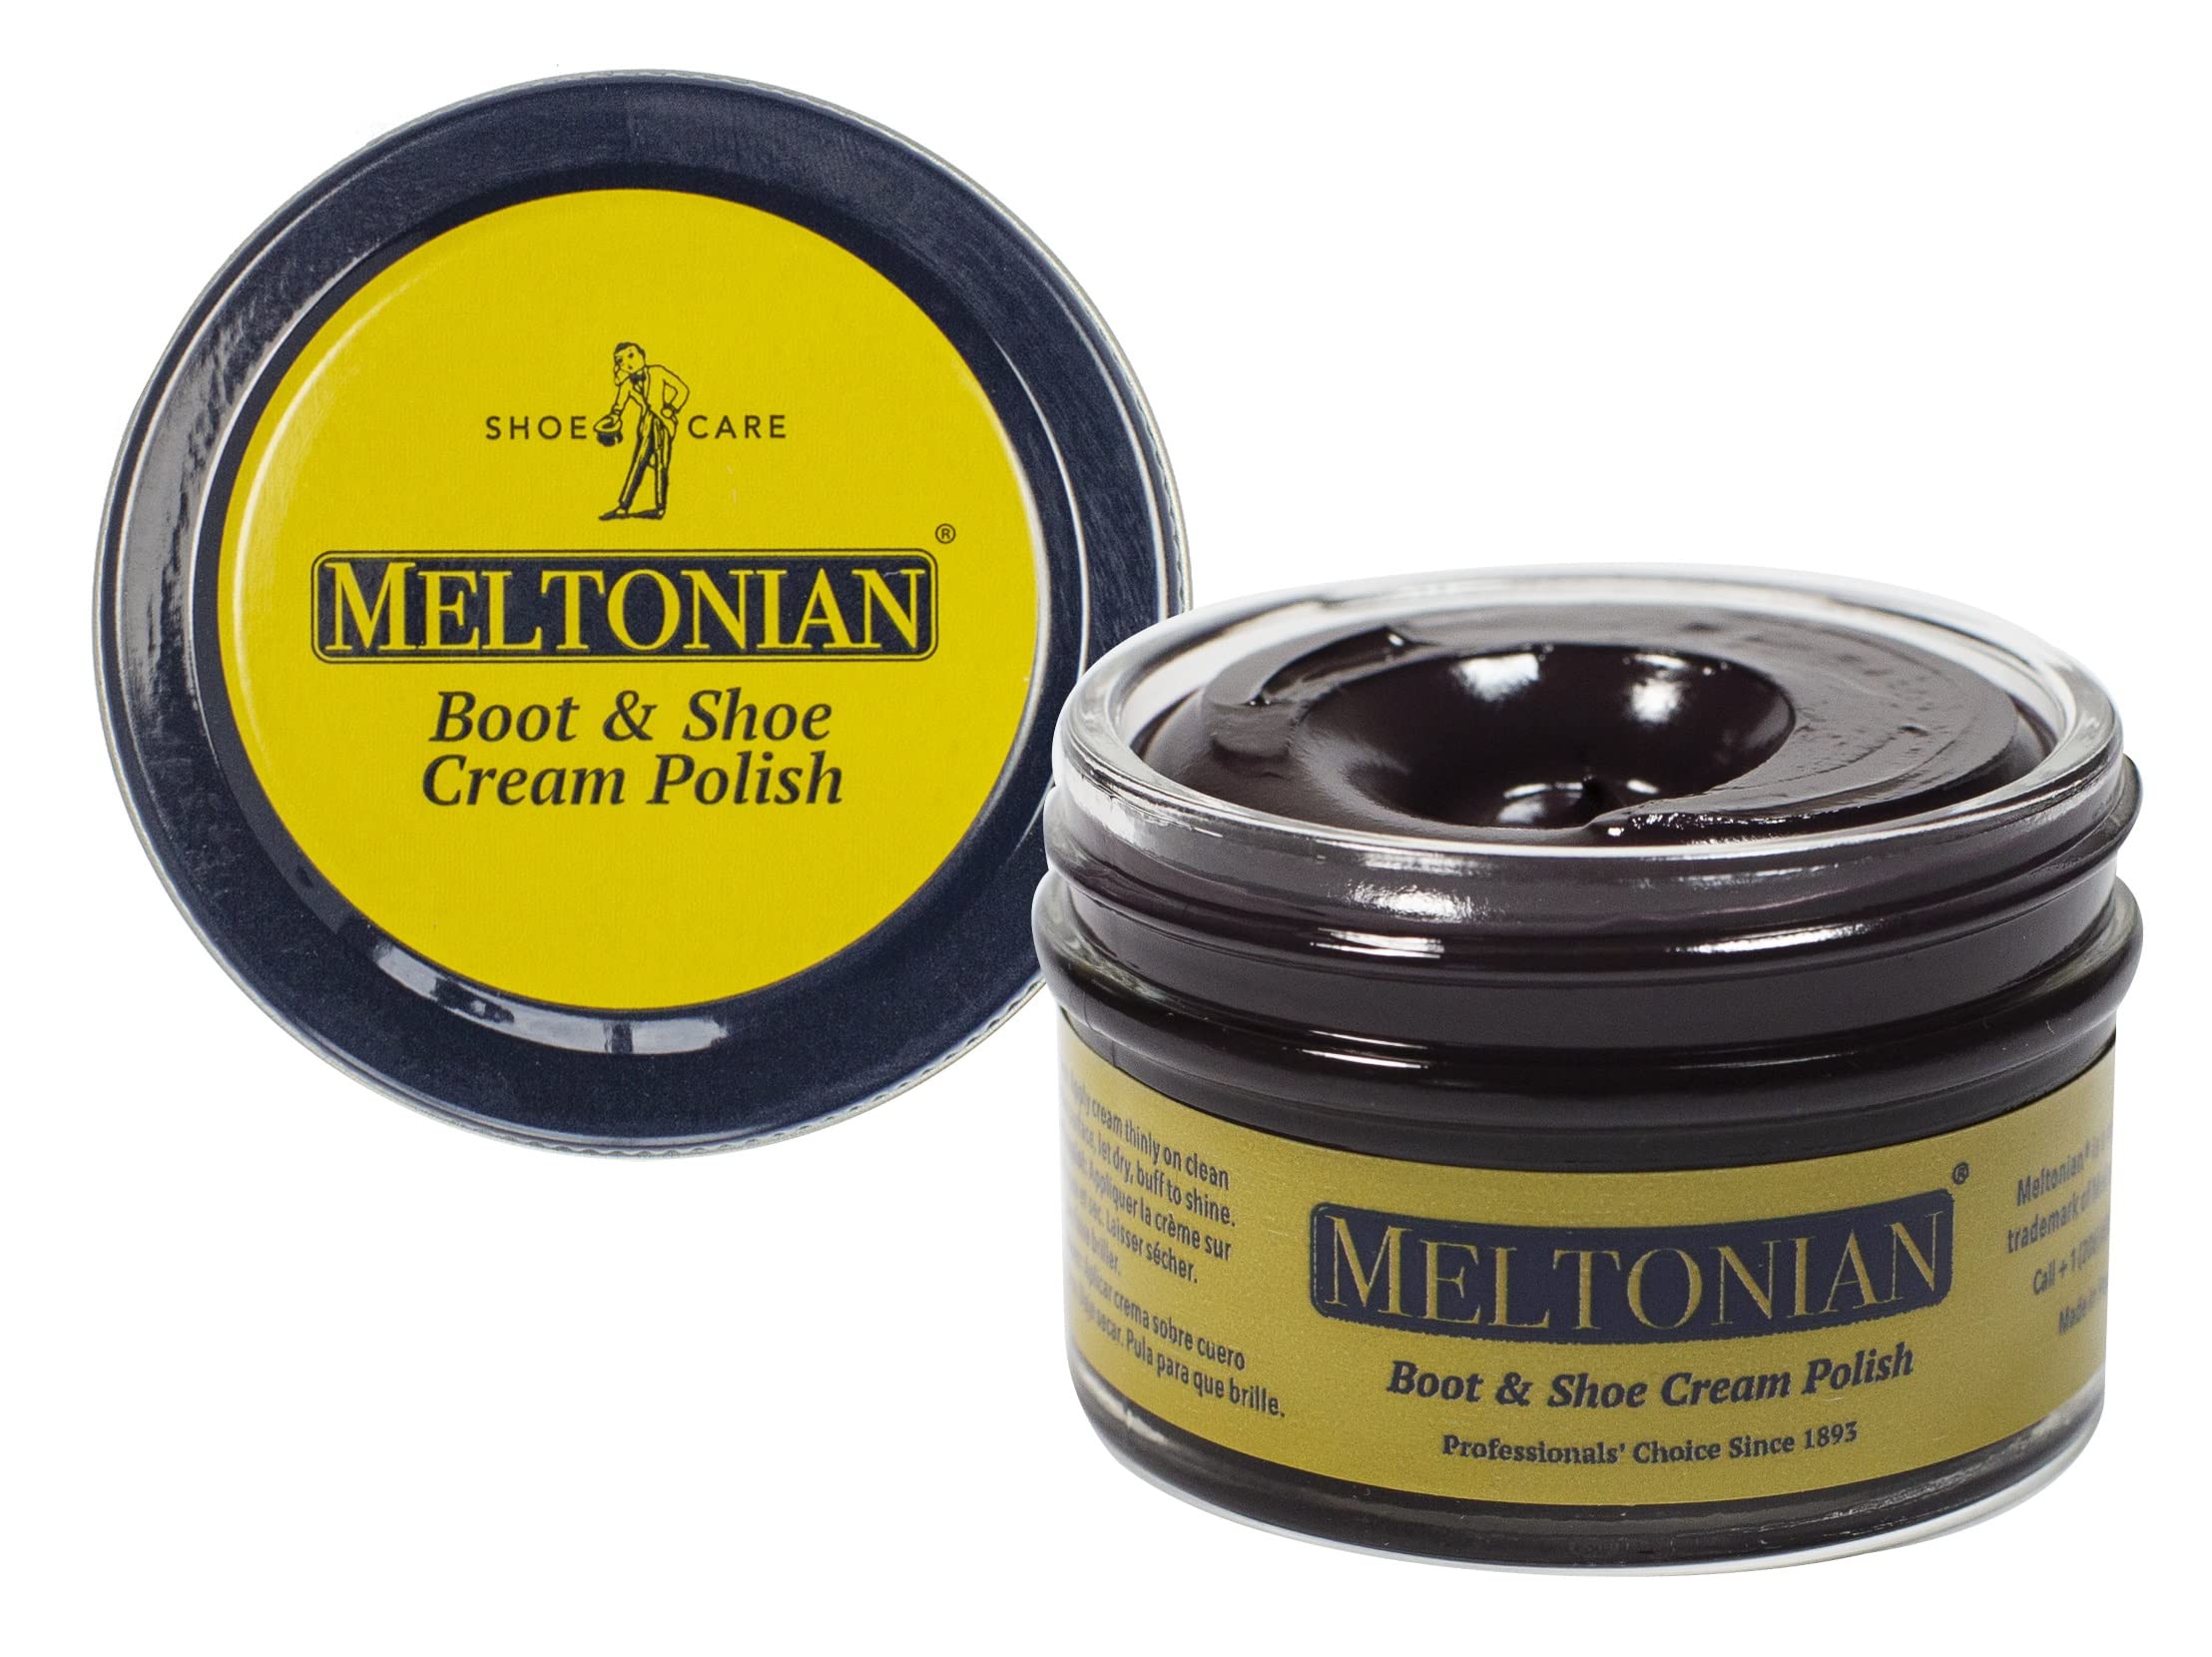 Meltonian cream  Bordeaux  High Quality Shoe Polish for Leather  Boot, Purse, Furniture Wax  Leather conditioner  17 OZ Jar